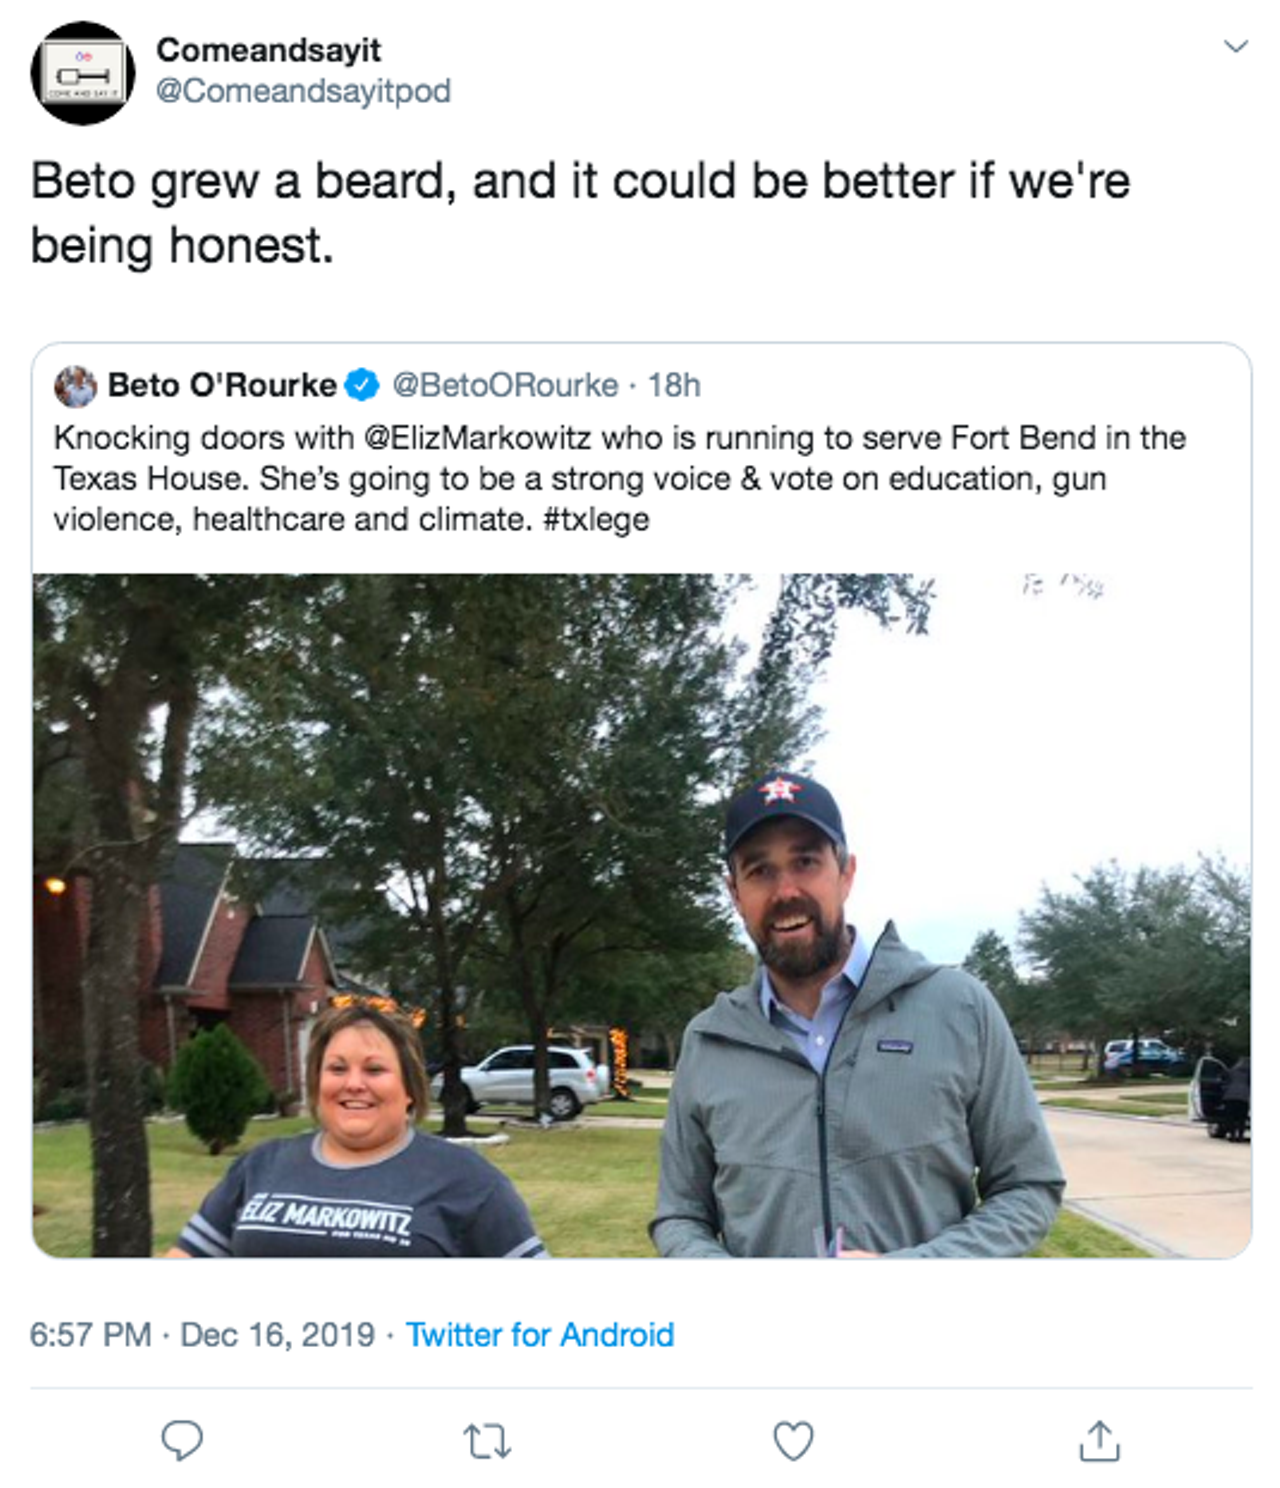 People Have Mixed Feelings About Beto O'Rourke's Beard